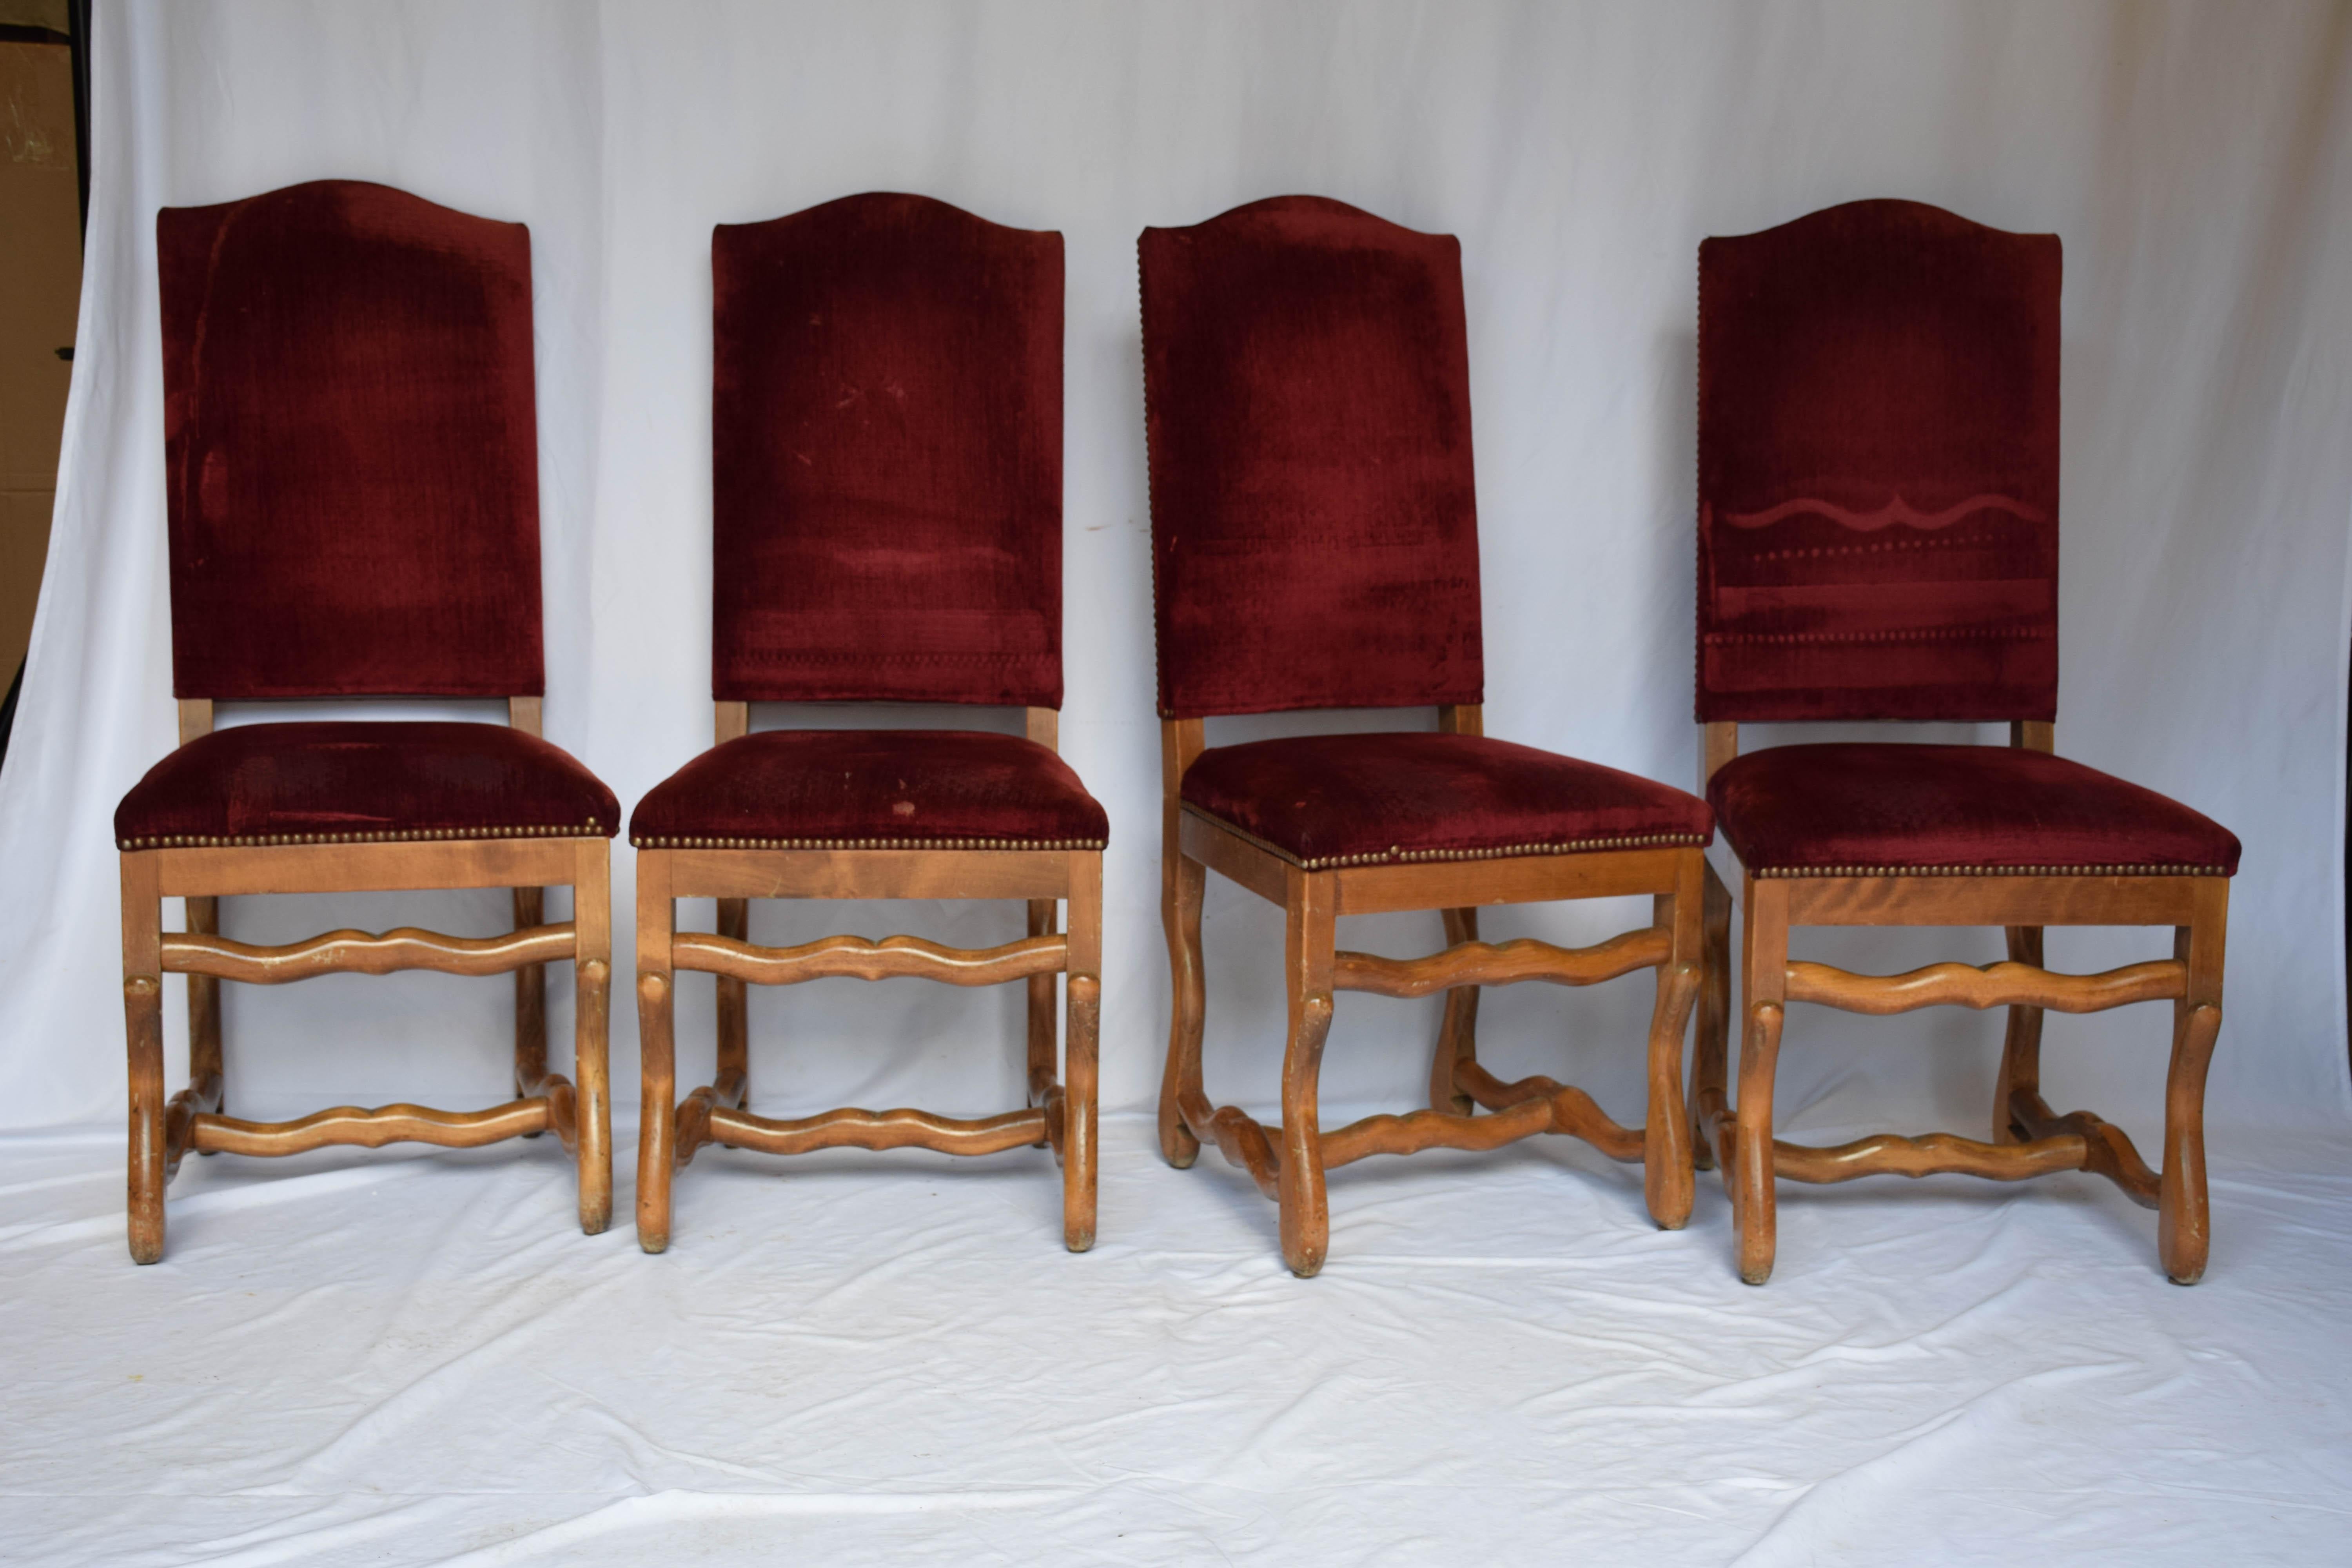 This set of Os de Mouton chairs ( French for sheep bone) is upholstered in a red velvet. The curved wood legs and arms are in a honey stained finish and are in the style of the Louis XIV period. They would make a beautiful addition to any dining